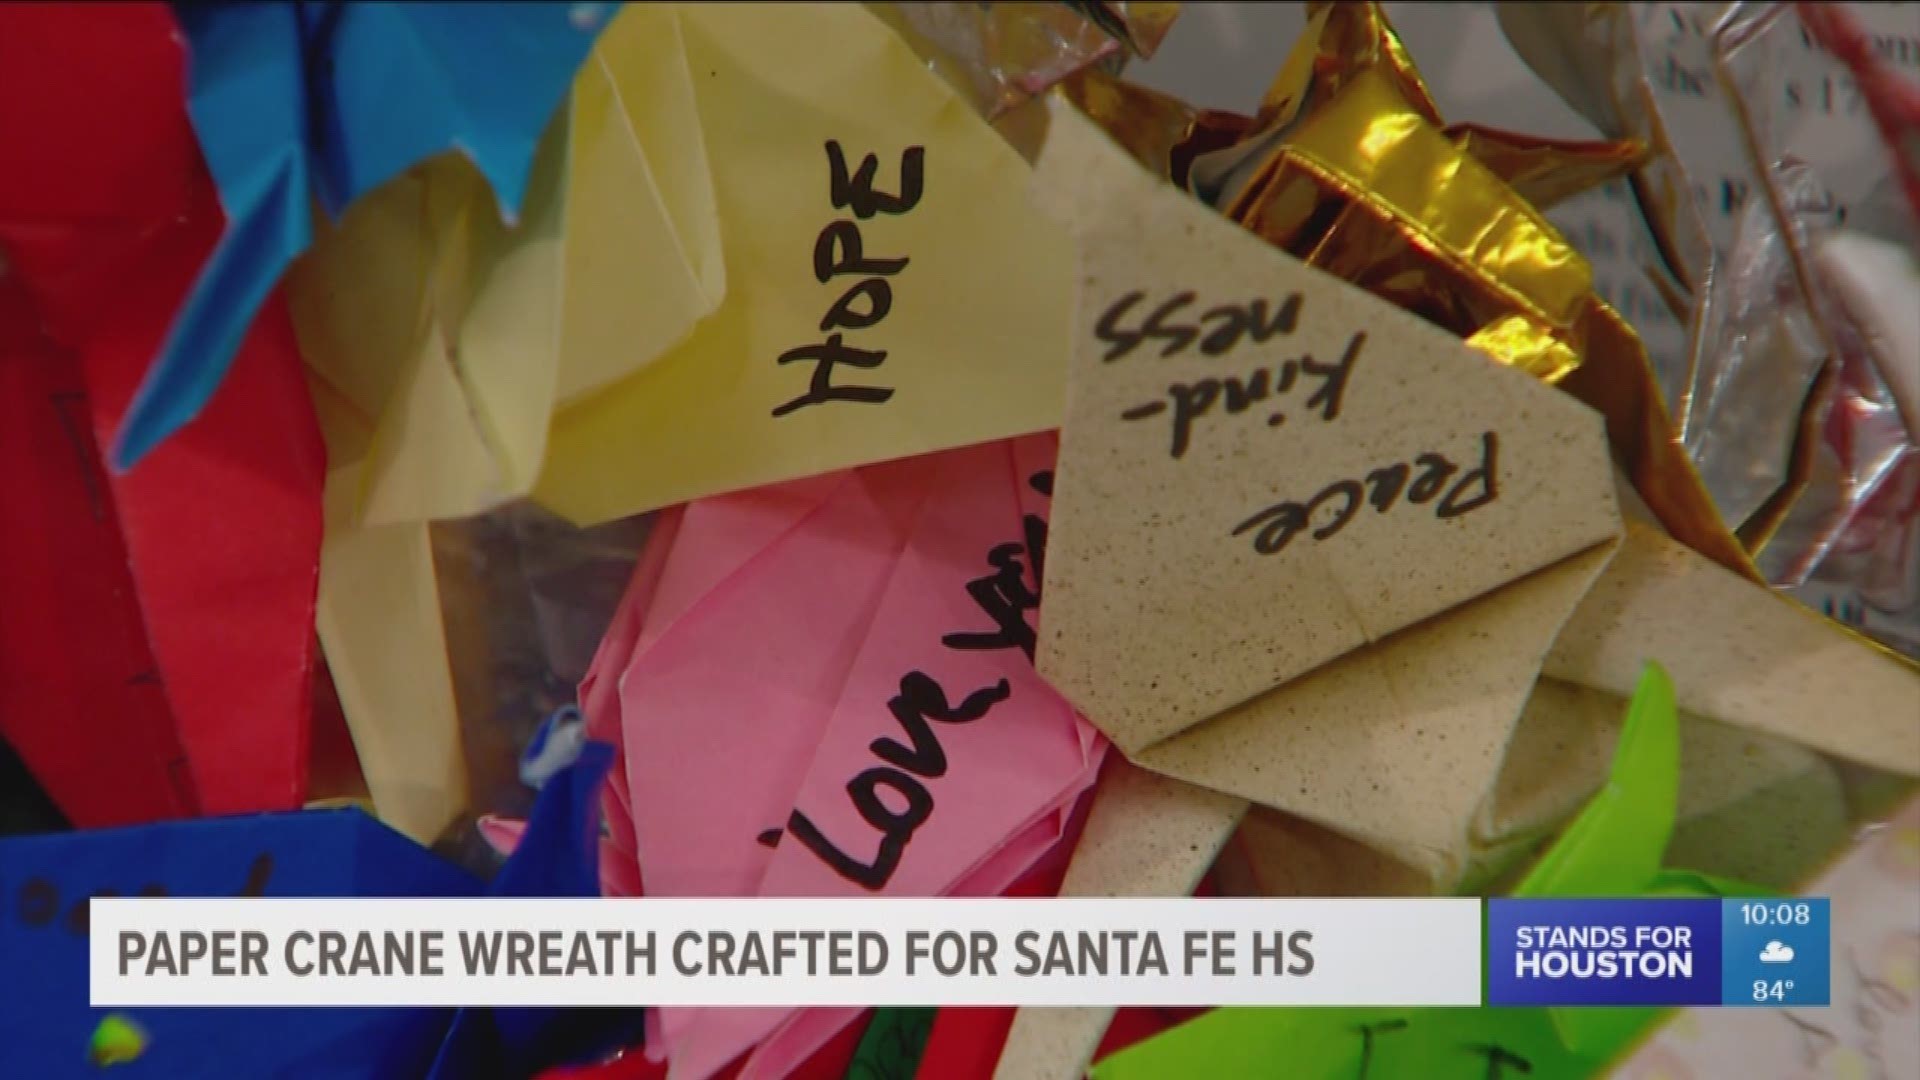 Those impacted by shooting tragedies handcrafted paper crane wreaths for those affected by the mass shooting at Santa Fe High School.